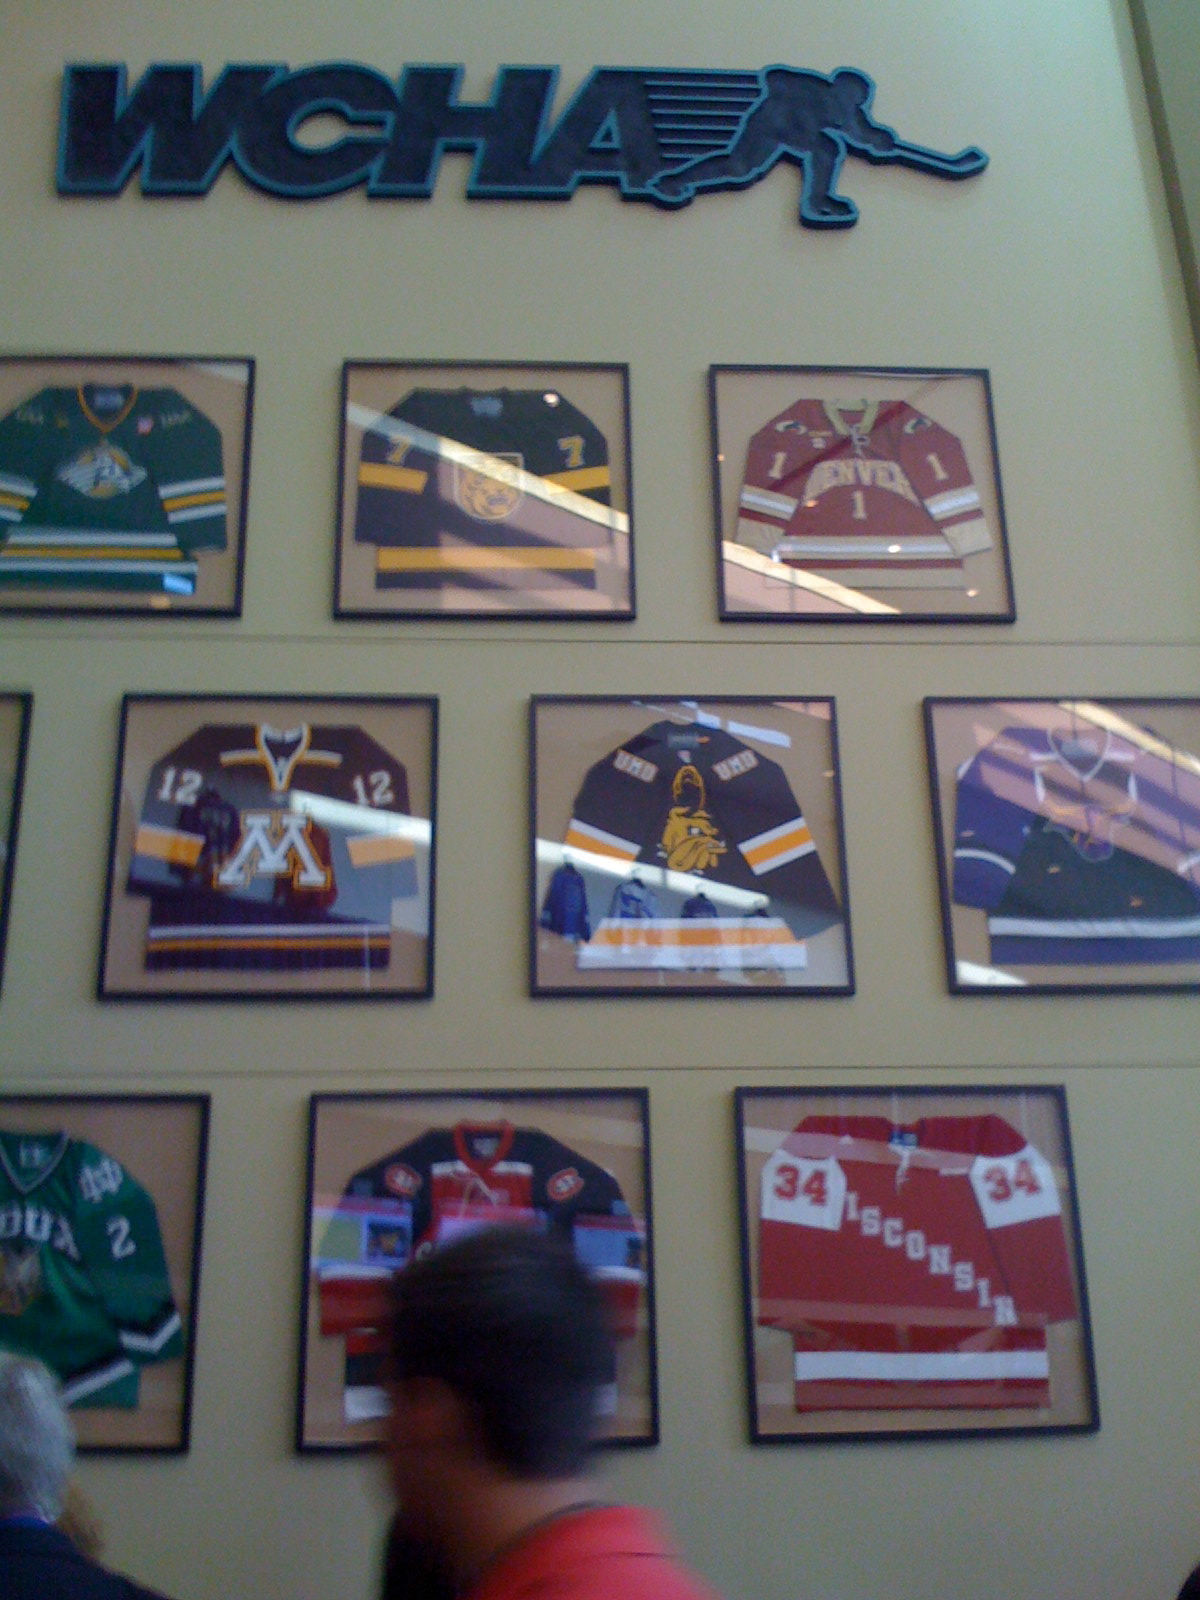 WCHA Jersey wall